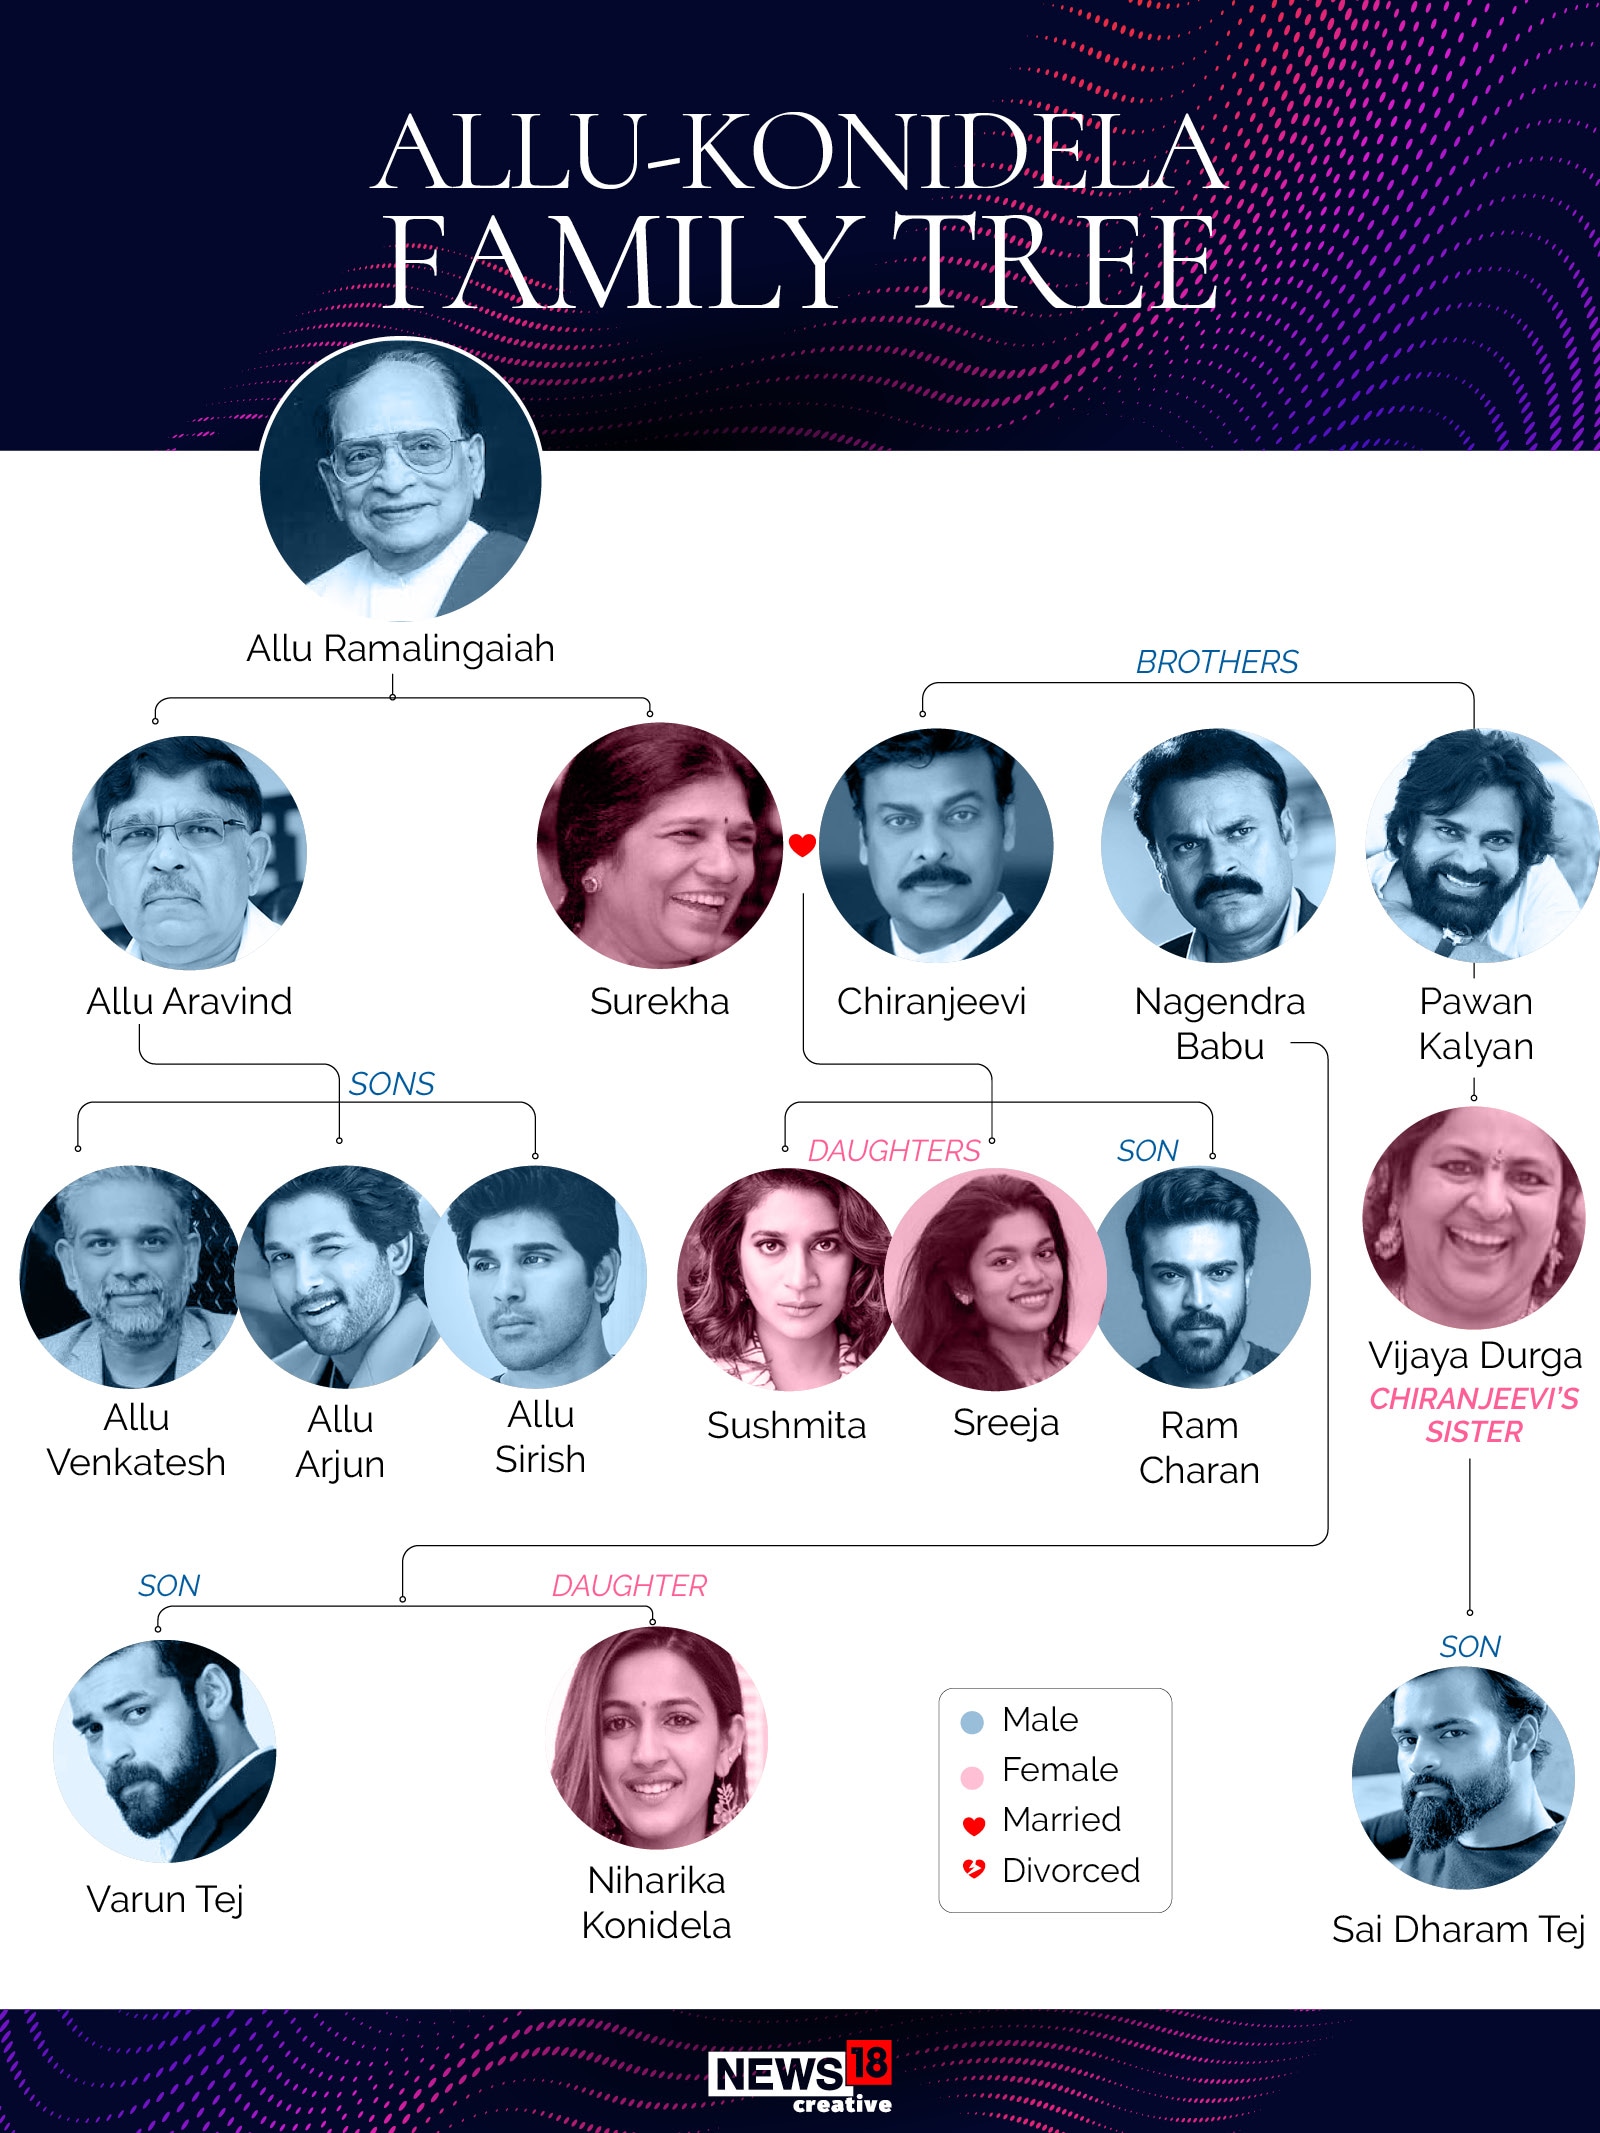 Clans in Indian Cinema: The Allu-Konidela Family of Telugu Superstars and  Film Producers